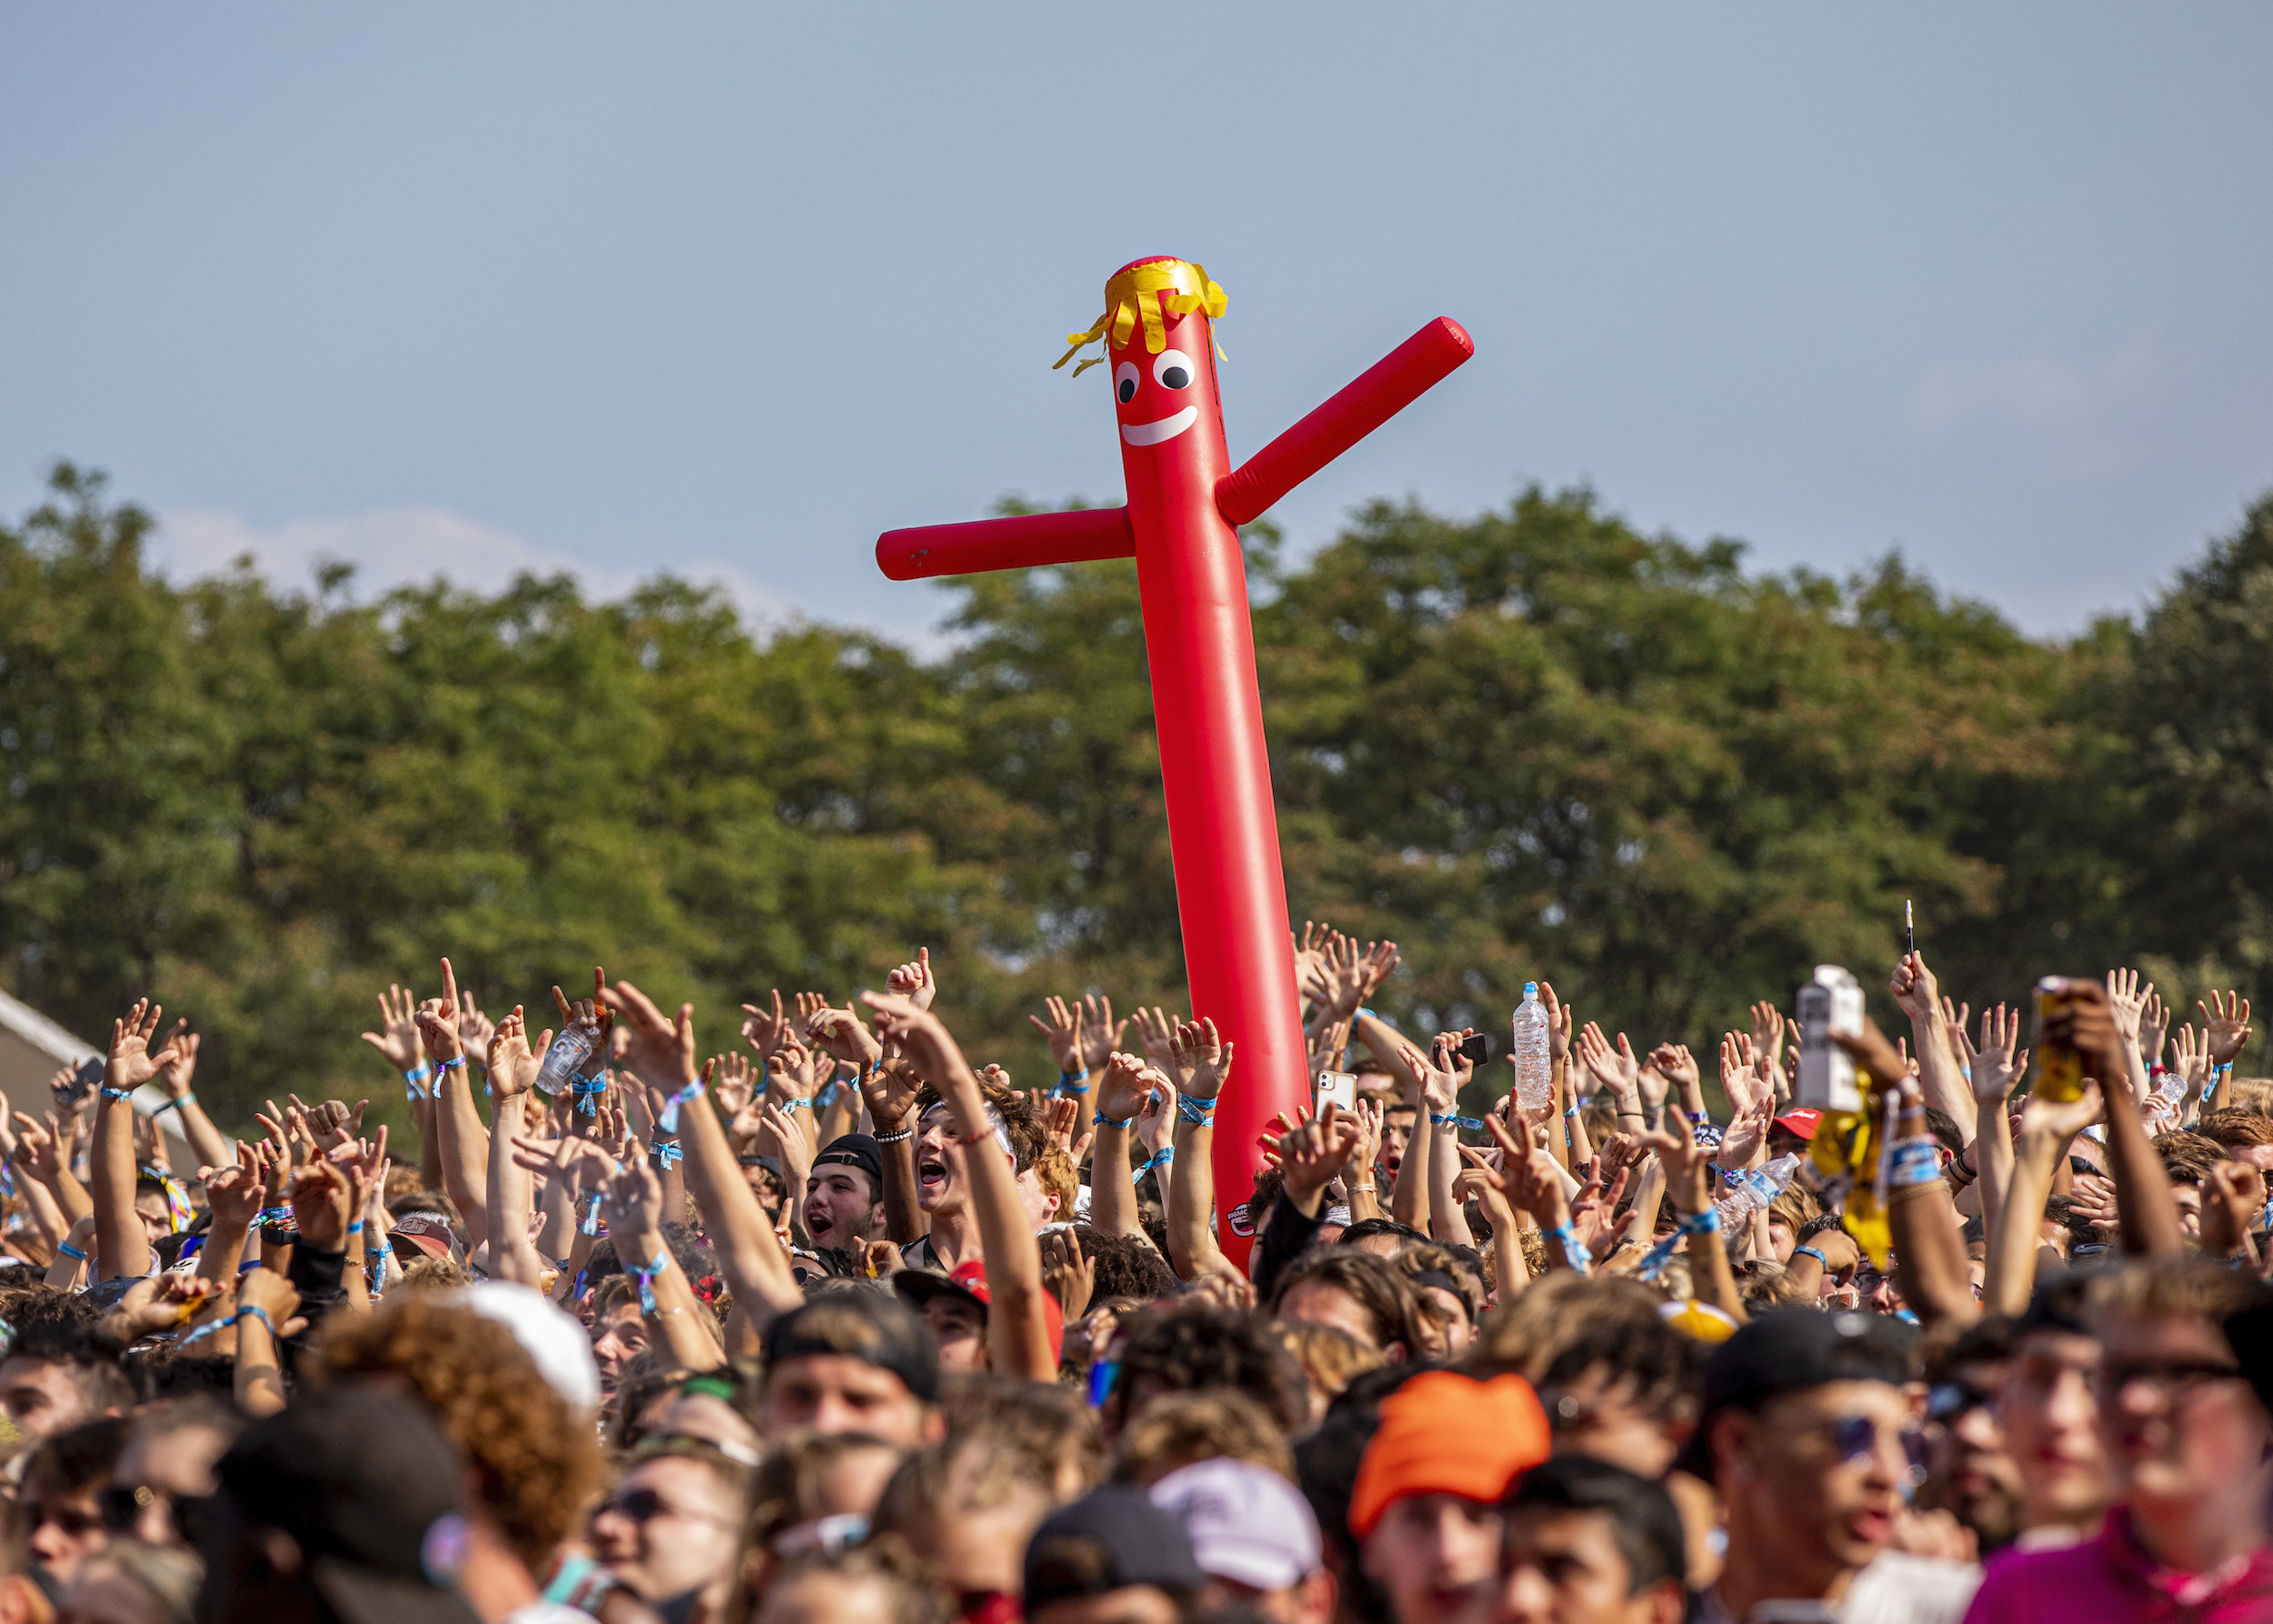 An inflatable character bobs amongst hundreds of hands in the air at Lollapalooza music festival in Chicago.